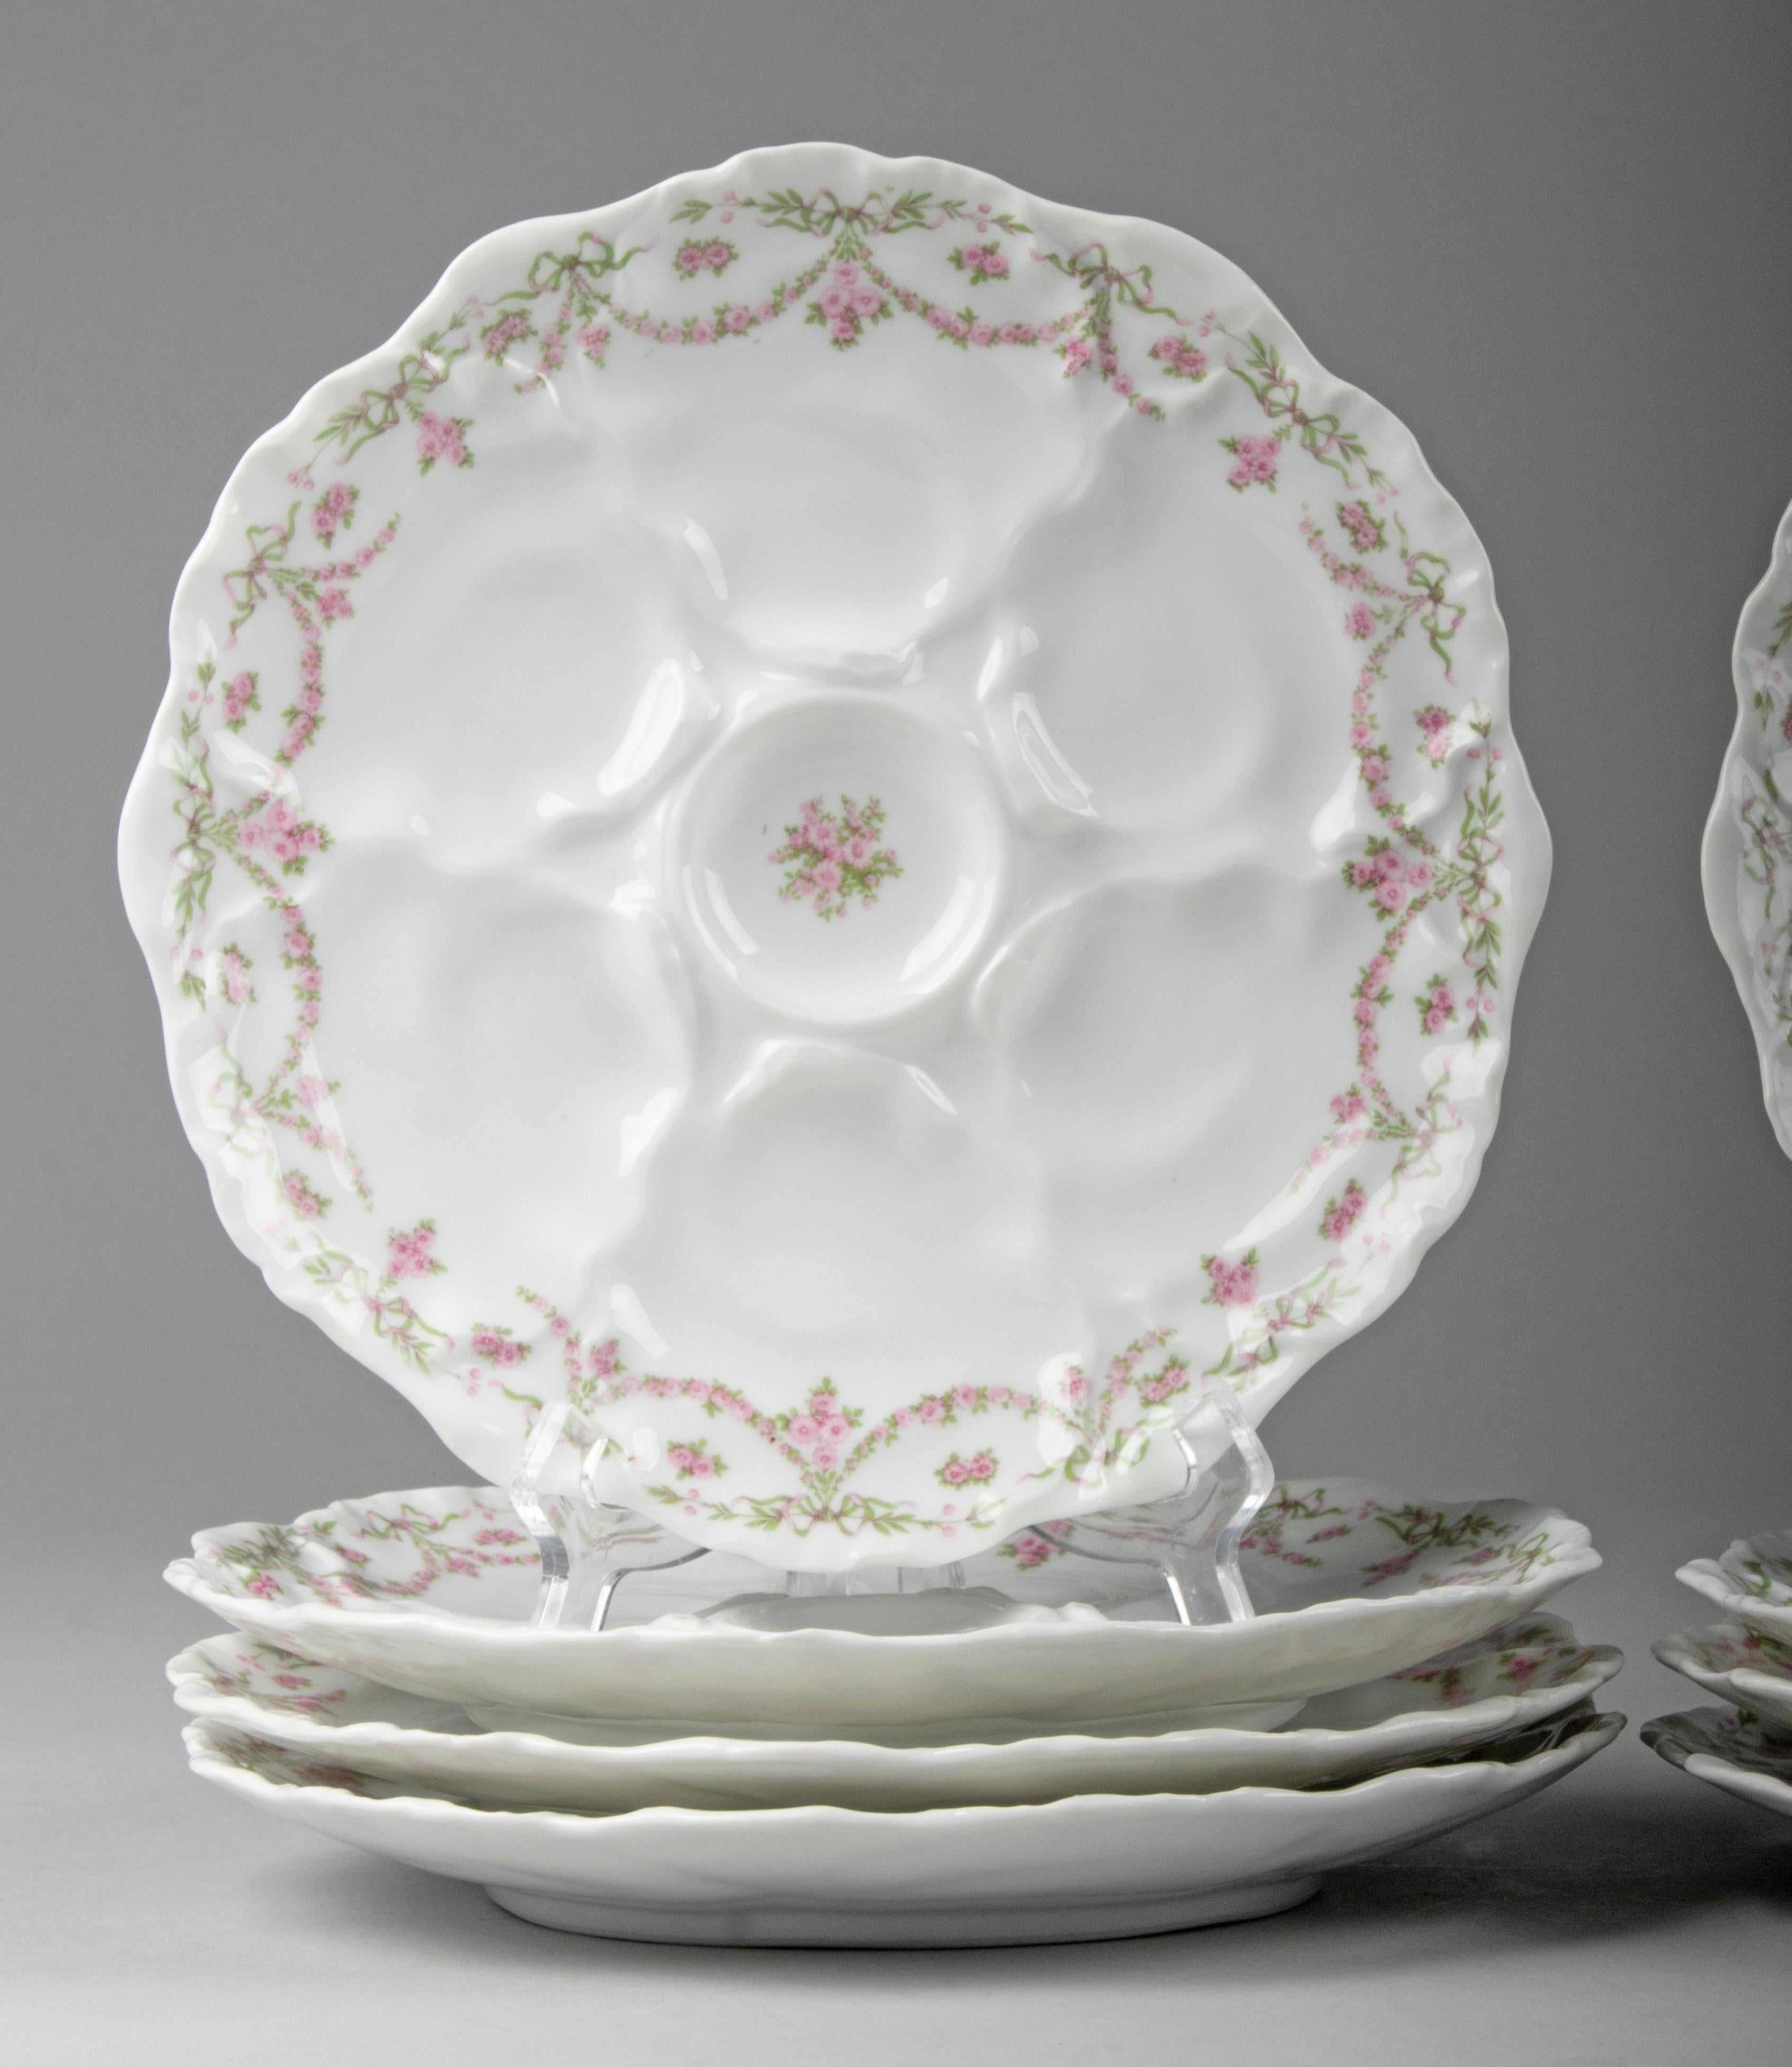 Beautiful set of 8 porcelain oyster plates from the French brand Limoges. The plates have room for six oysters each. The porcelain is decorated with garlands and fine roses. All plates are marked on the back. The set is in good condition. No chips